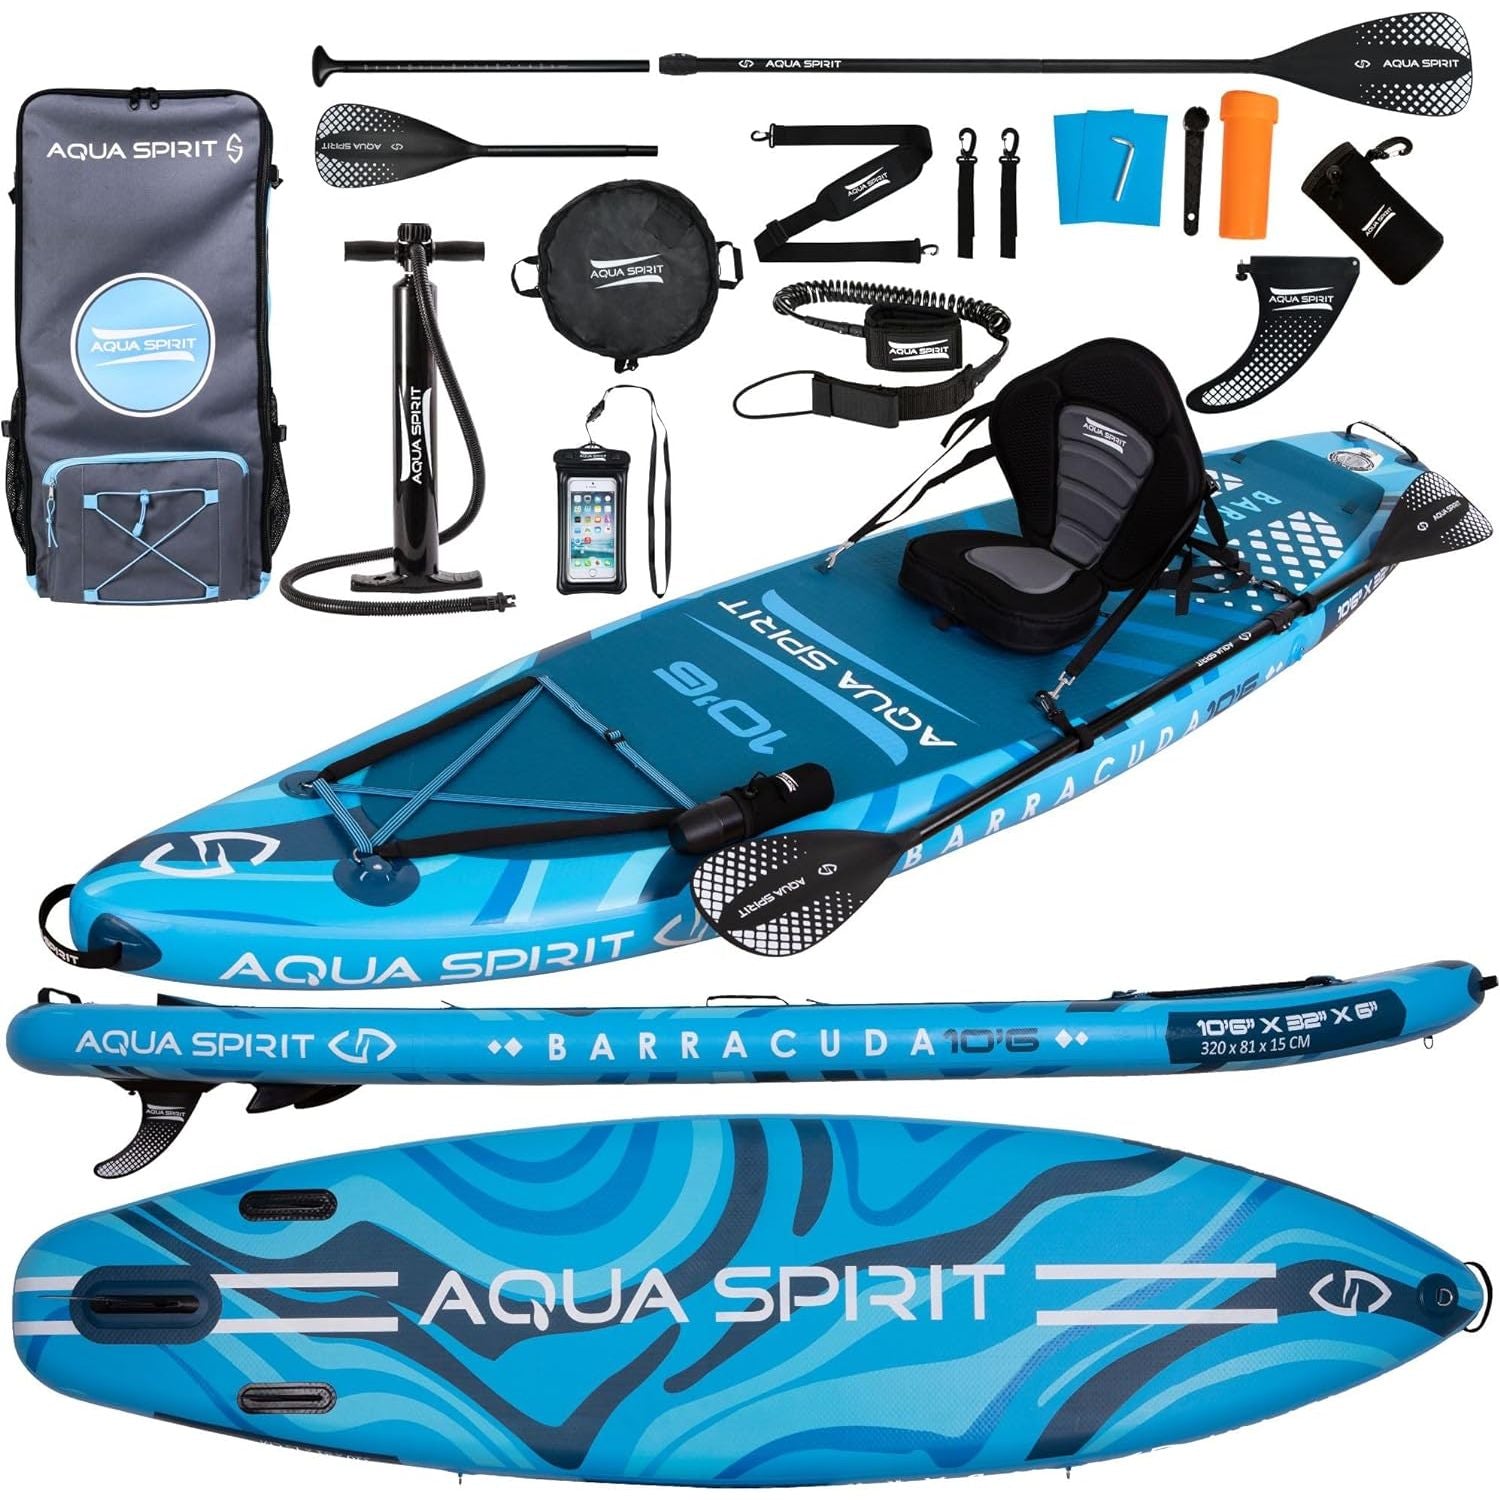 AQUA SPIRIT Barracuda Inflatable Stand Up Paddle Board With Kayak